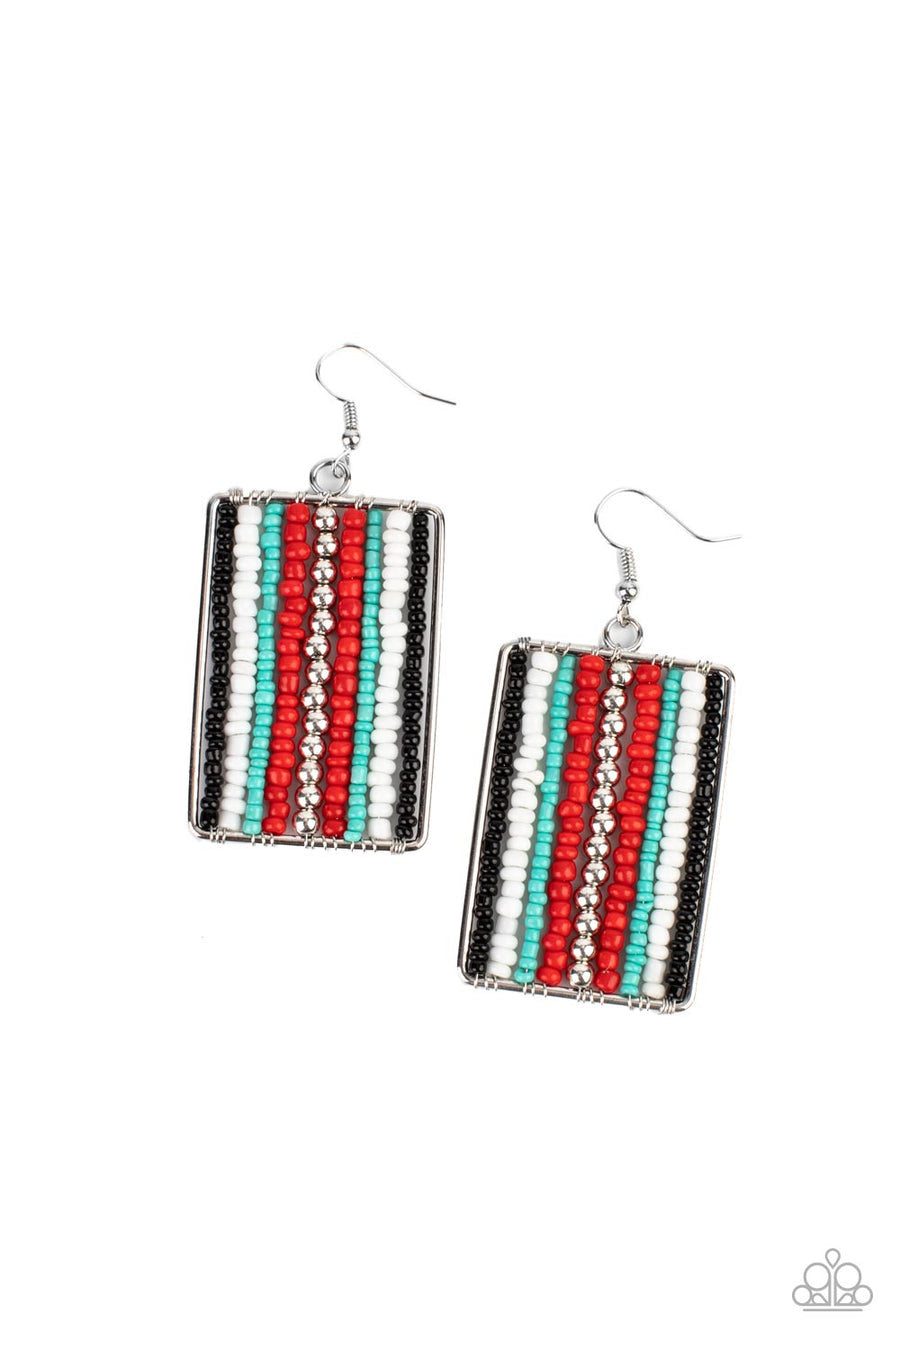 Paparazzi Beadwork Wonder - Red Earring - A Finishing Touch Jewelry